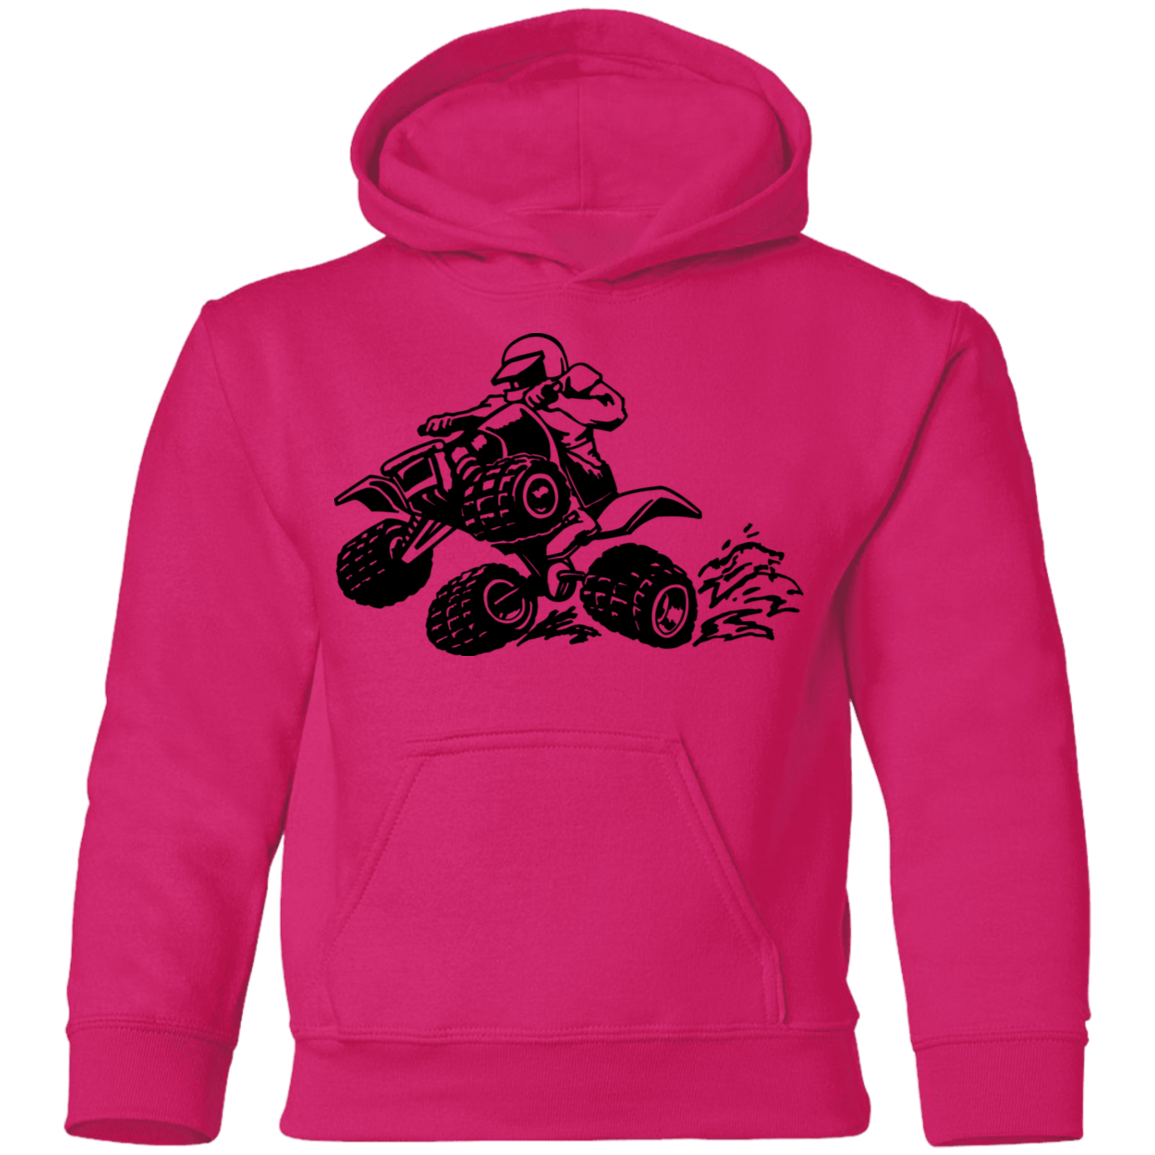 Youth 4-wheeler pullover Hoodie